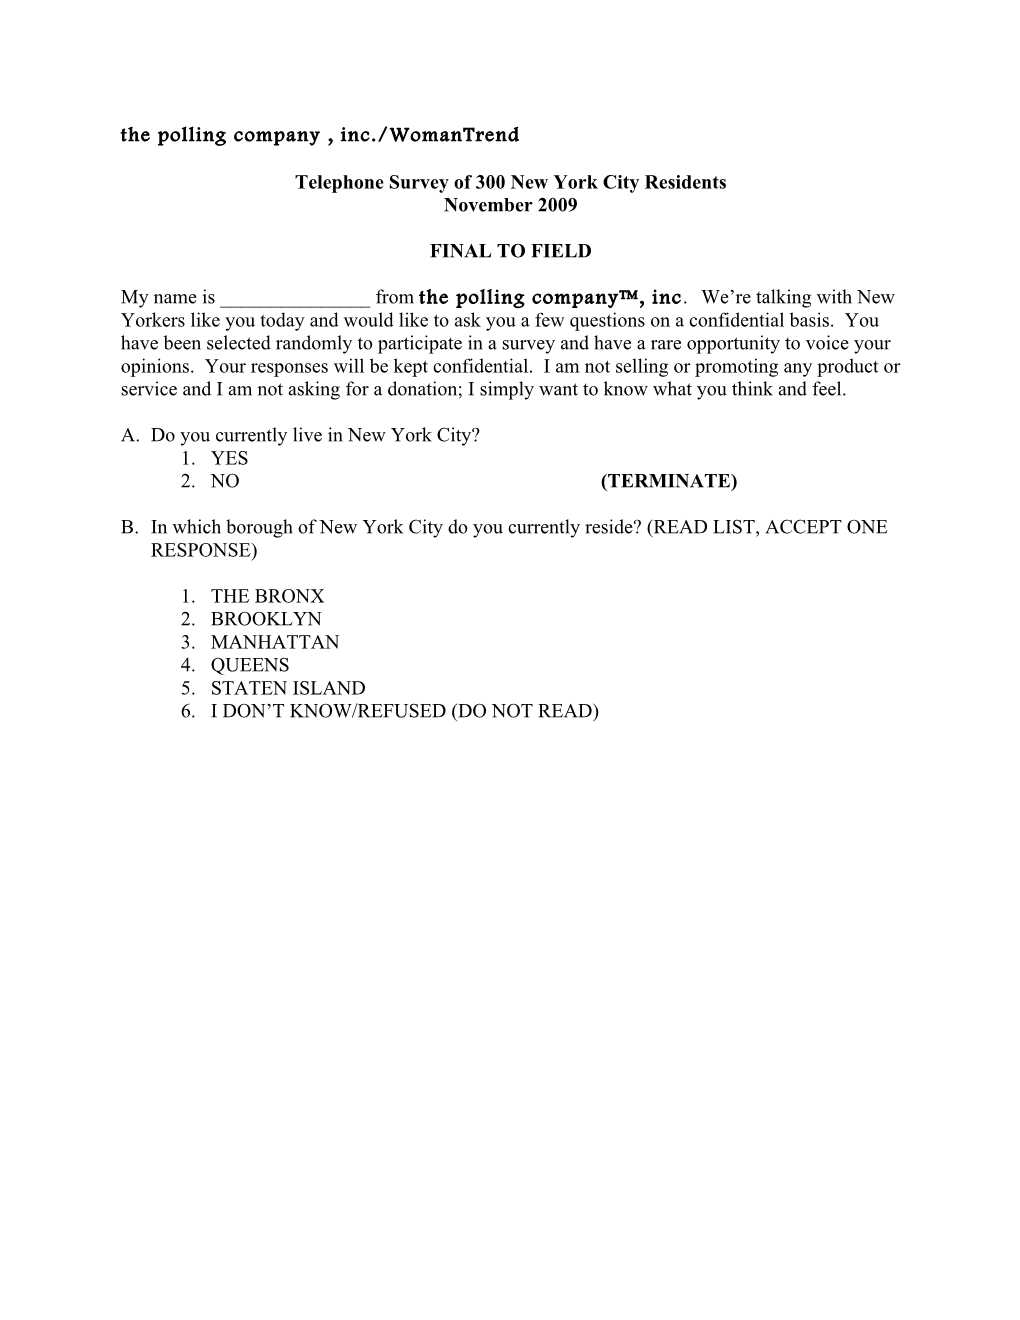 Telephone Survey of New York City Residents -- FINAL to FIELD